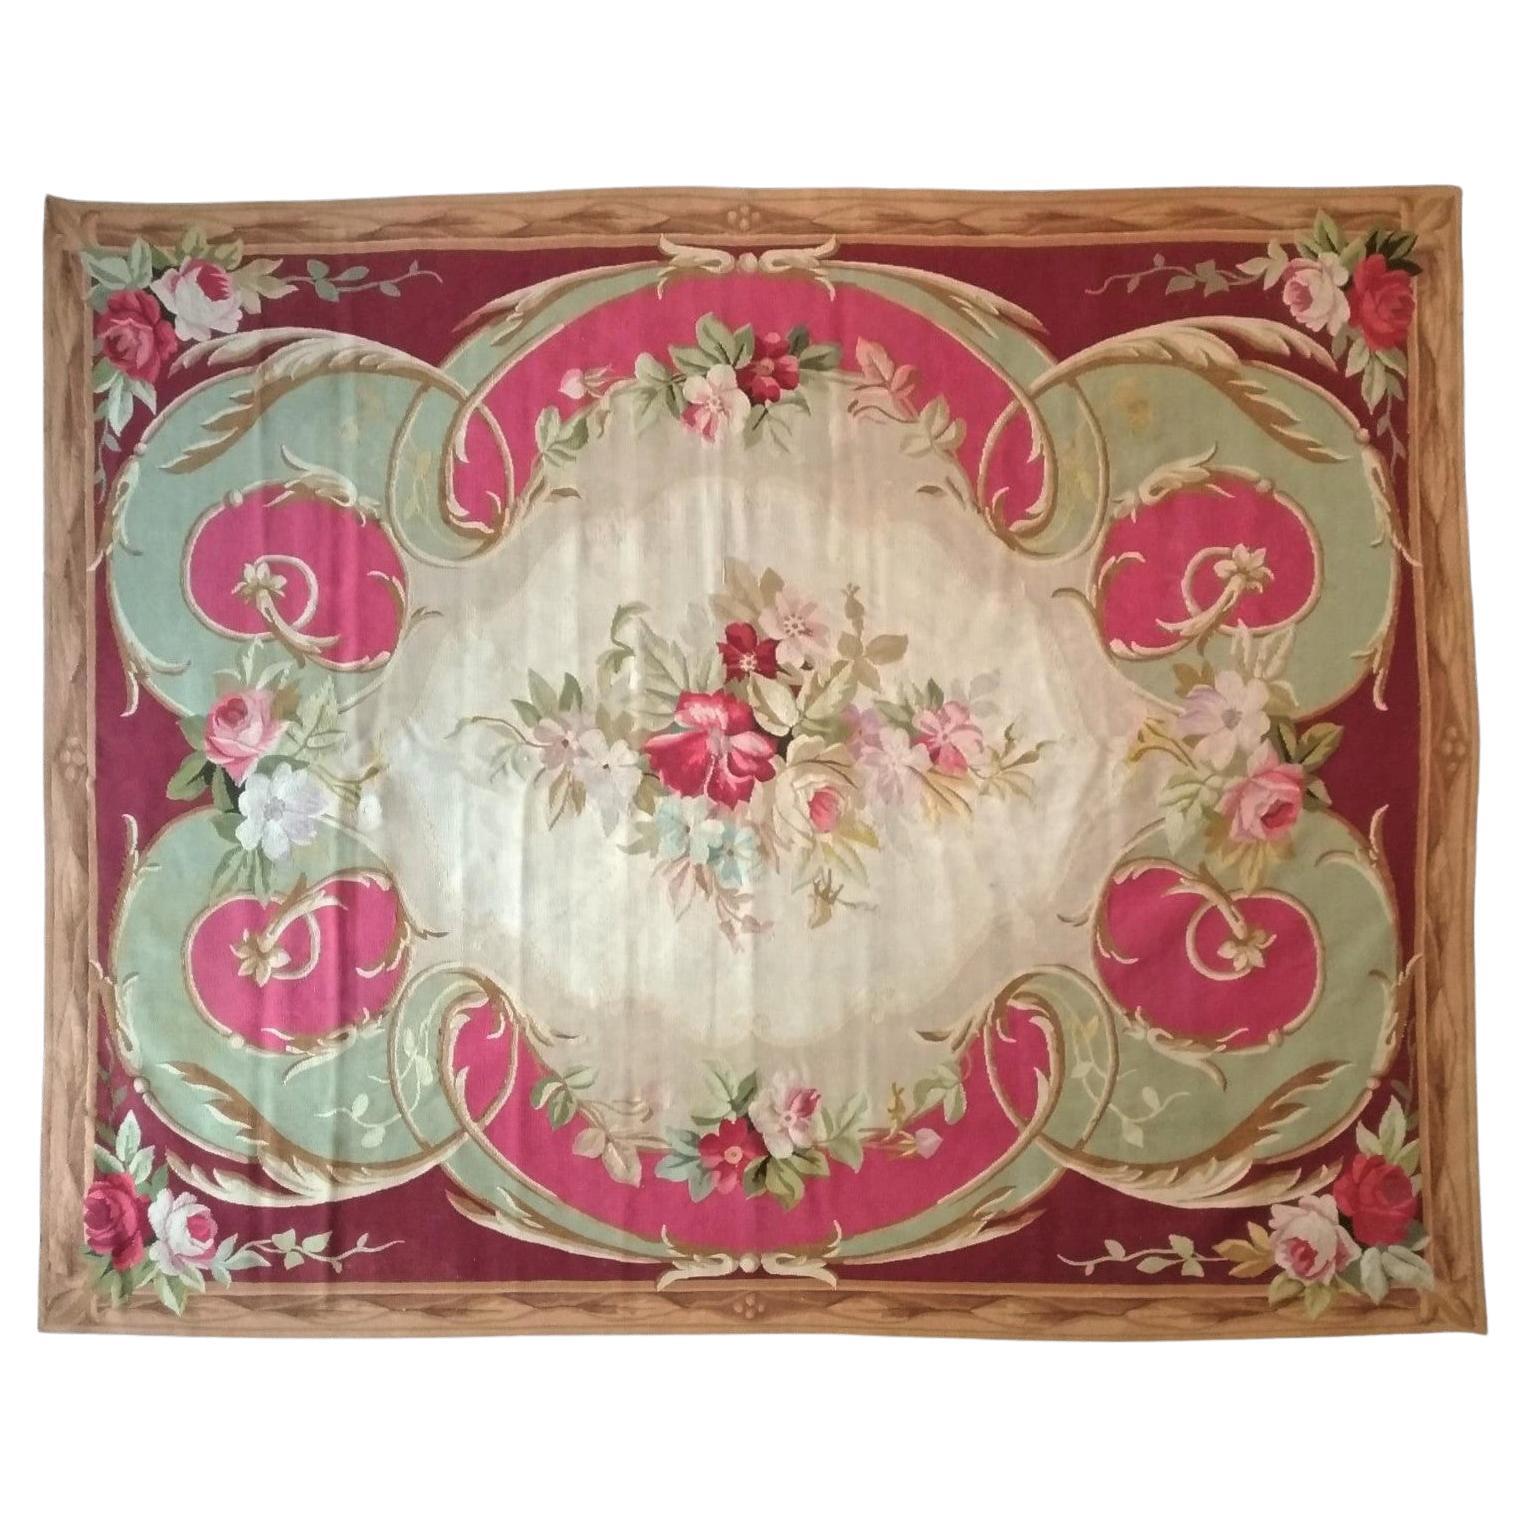  Aubusson Rug from XIX Century Napoleon 3 - n° 1151 For Sale